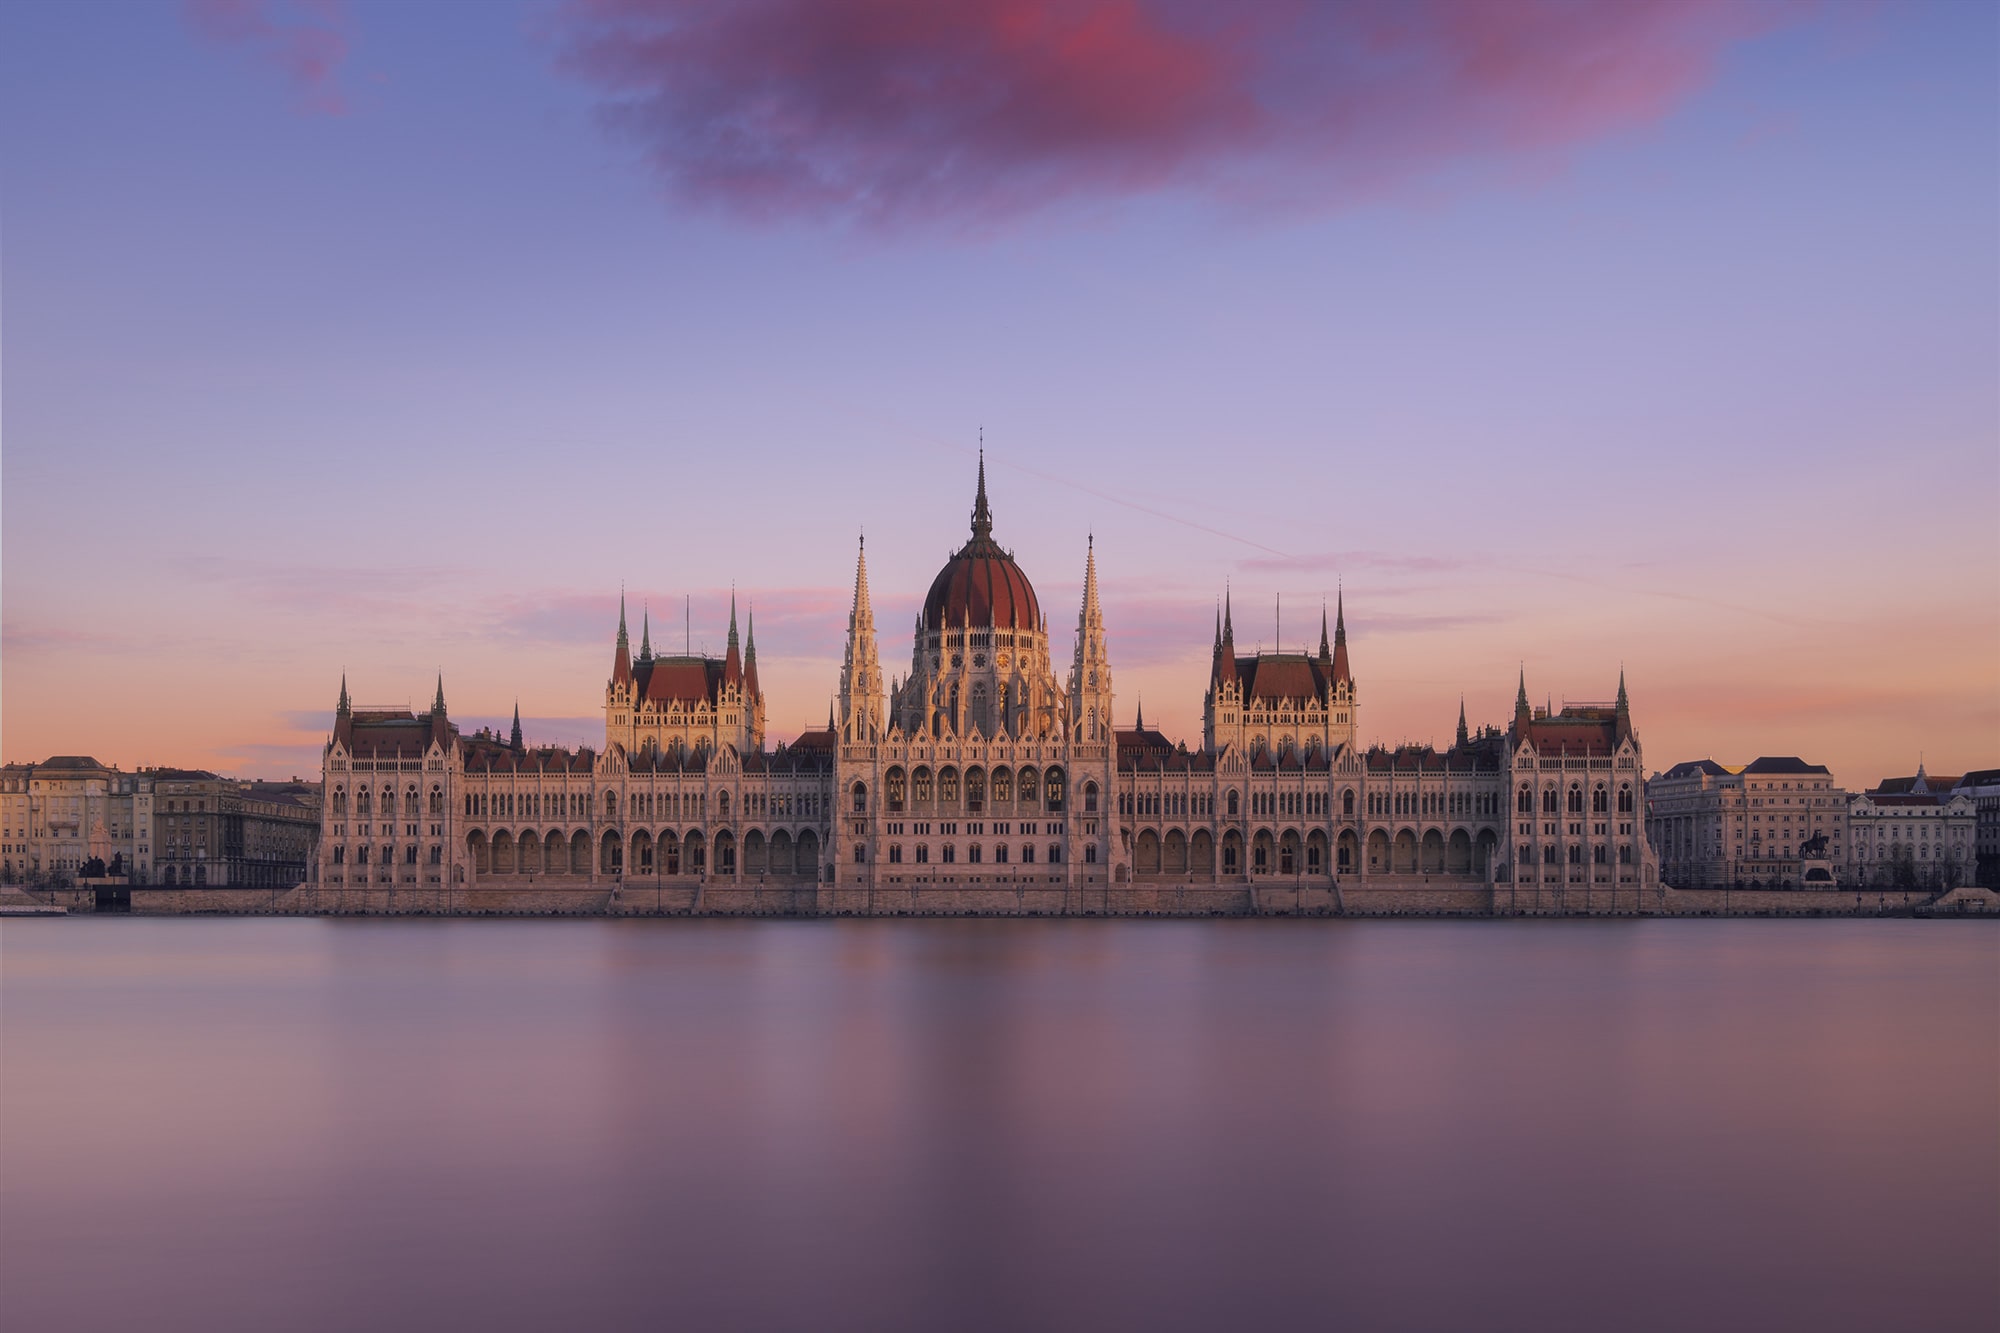 Delight in the mesmerizing beauty of Budapest's Parliament building captured at sunset in this stunning long exposure photograph by travel photographer Jennifer Esseiva using her Nikon Z8. The warm hues of the setting sun cast a golden glow over the majestic architecture, while the gentle movement of the clouds adds a sense of serenity to the scene. From the intricate details of the building's façade to the tranquil waters of the Danube River below, every element is expertly composed to evoke a feeling of awe and wonder. Immerse yourself in the breathtaking panorama of Budapest's skyline as captured by Jennifer Esseiva, and experience the magic of sunset over the Parliament.